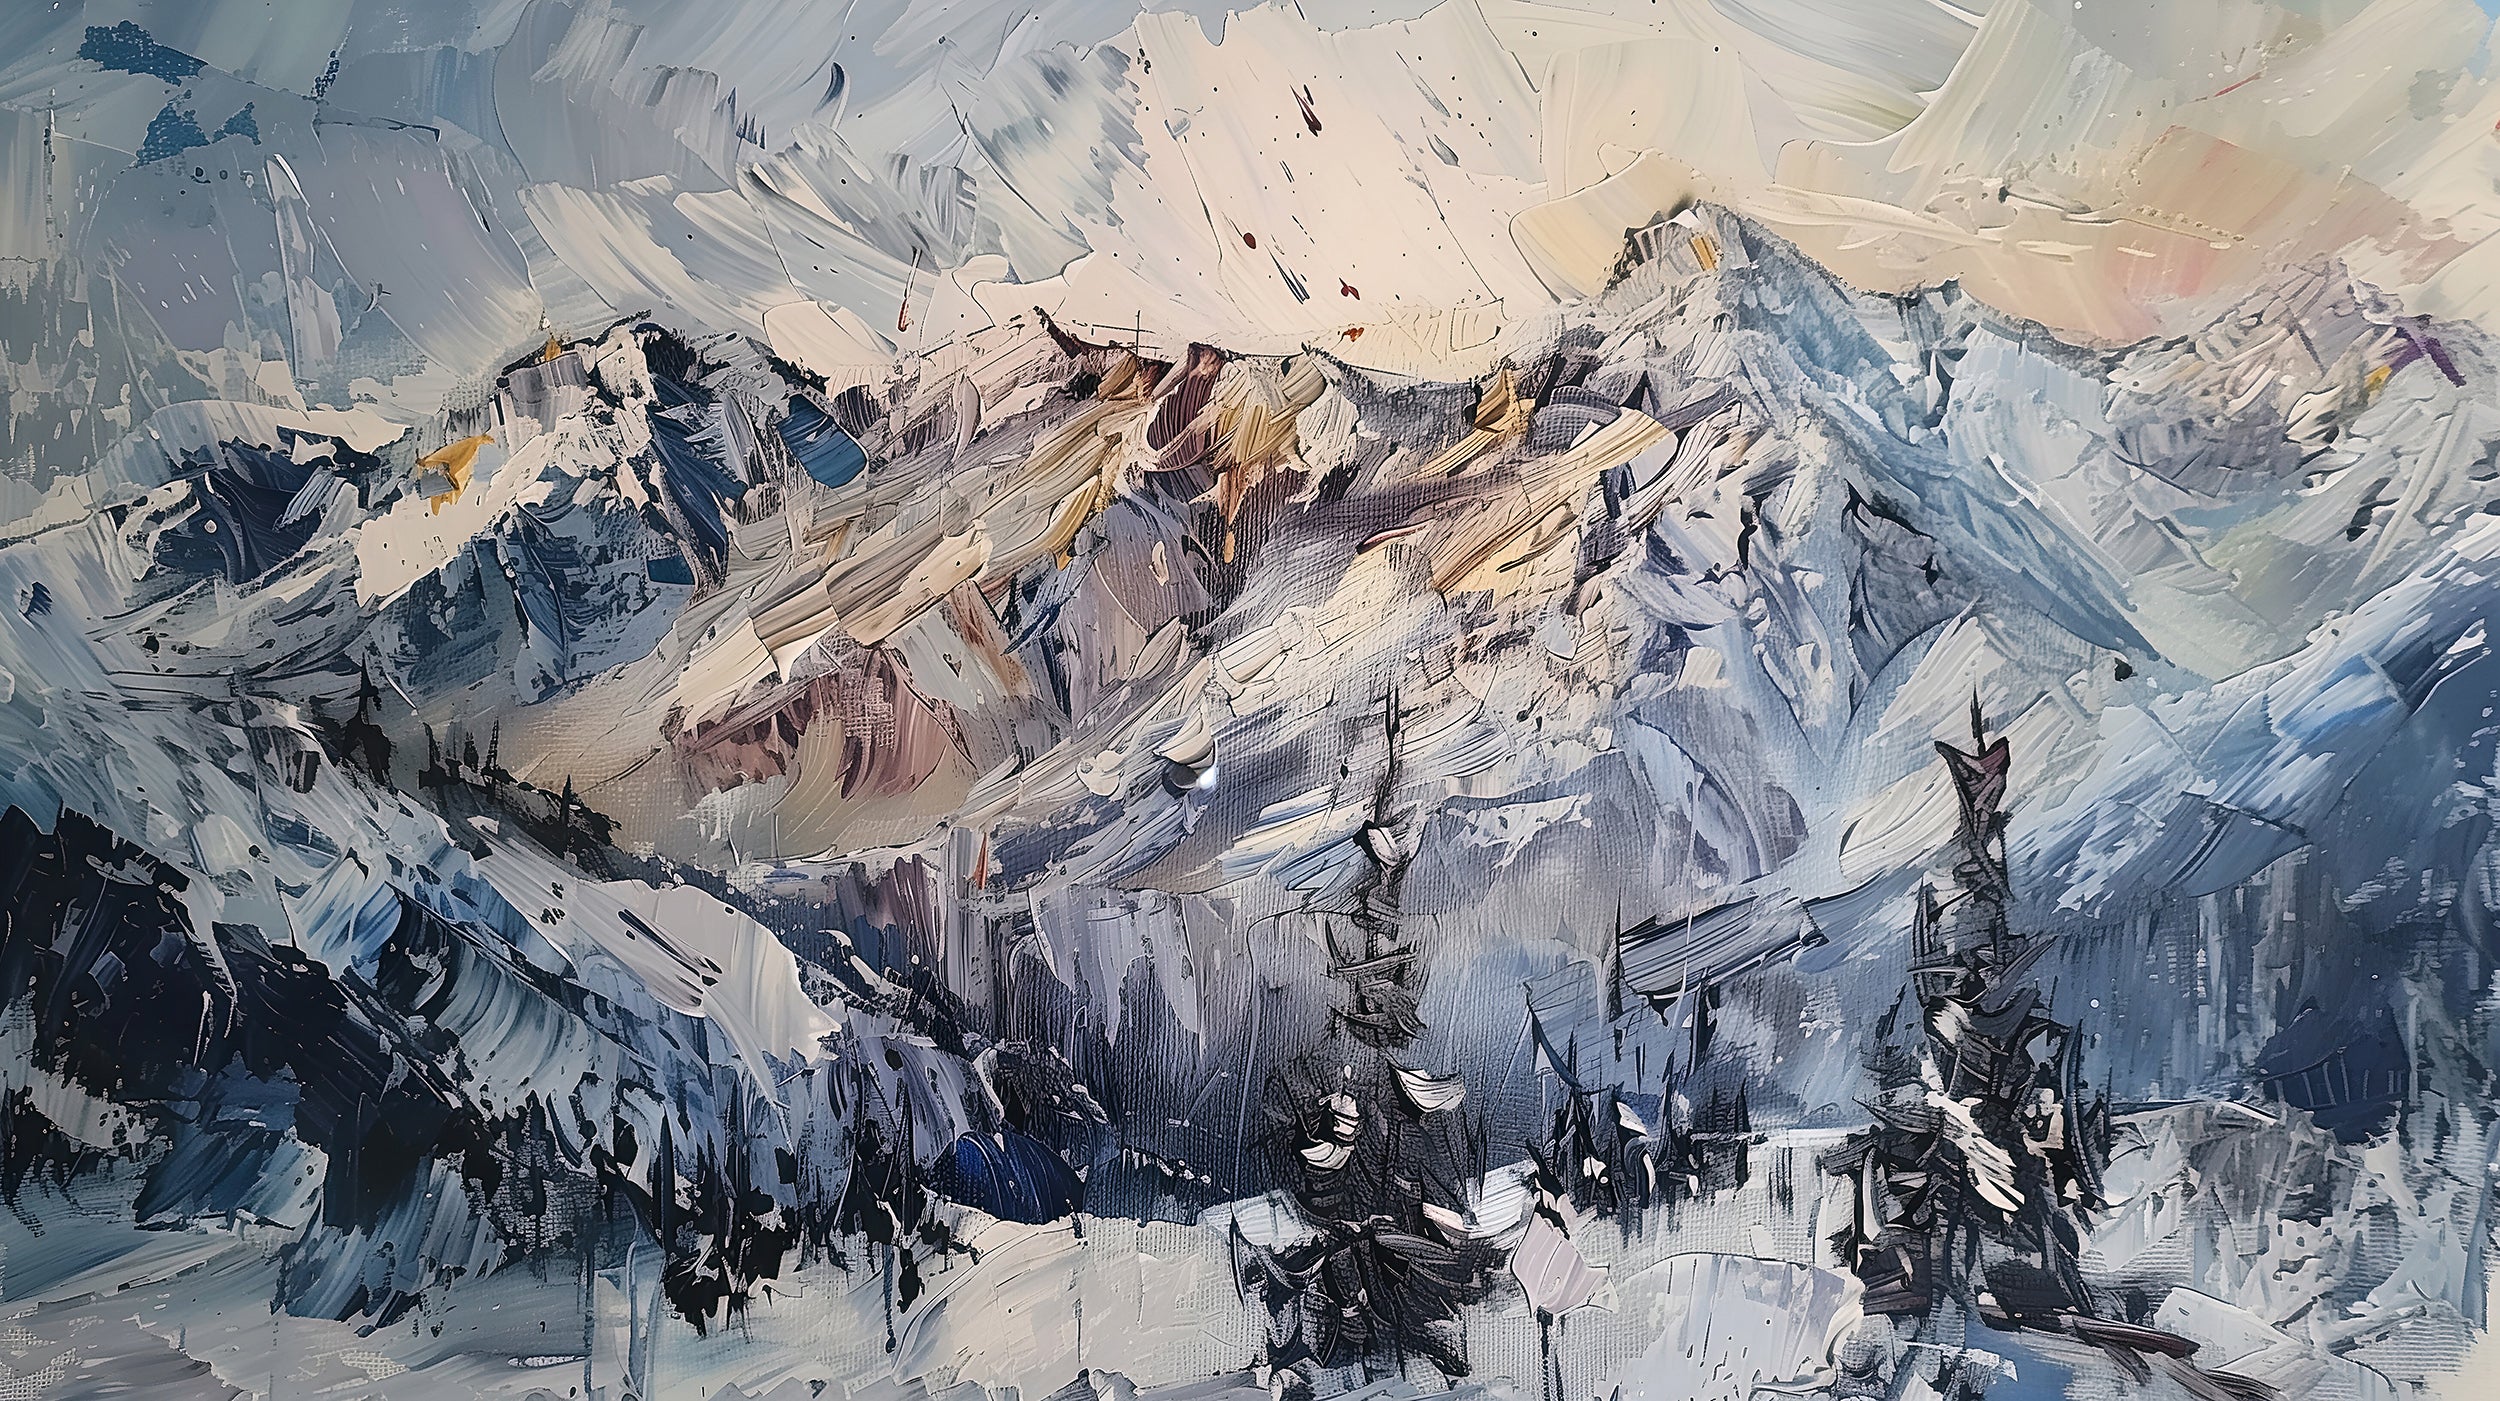 Abstract Oil Painting of Snowy Mountains Mural, Peel and Stick Mountains, Snowy Landscape Wallpaper, Blue and White Mountain Mural